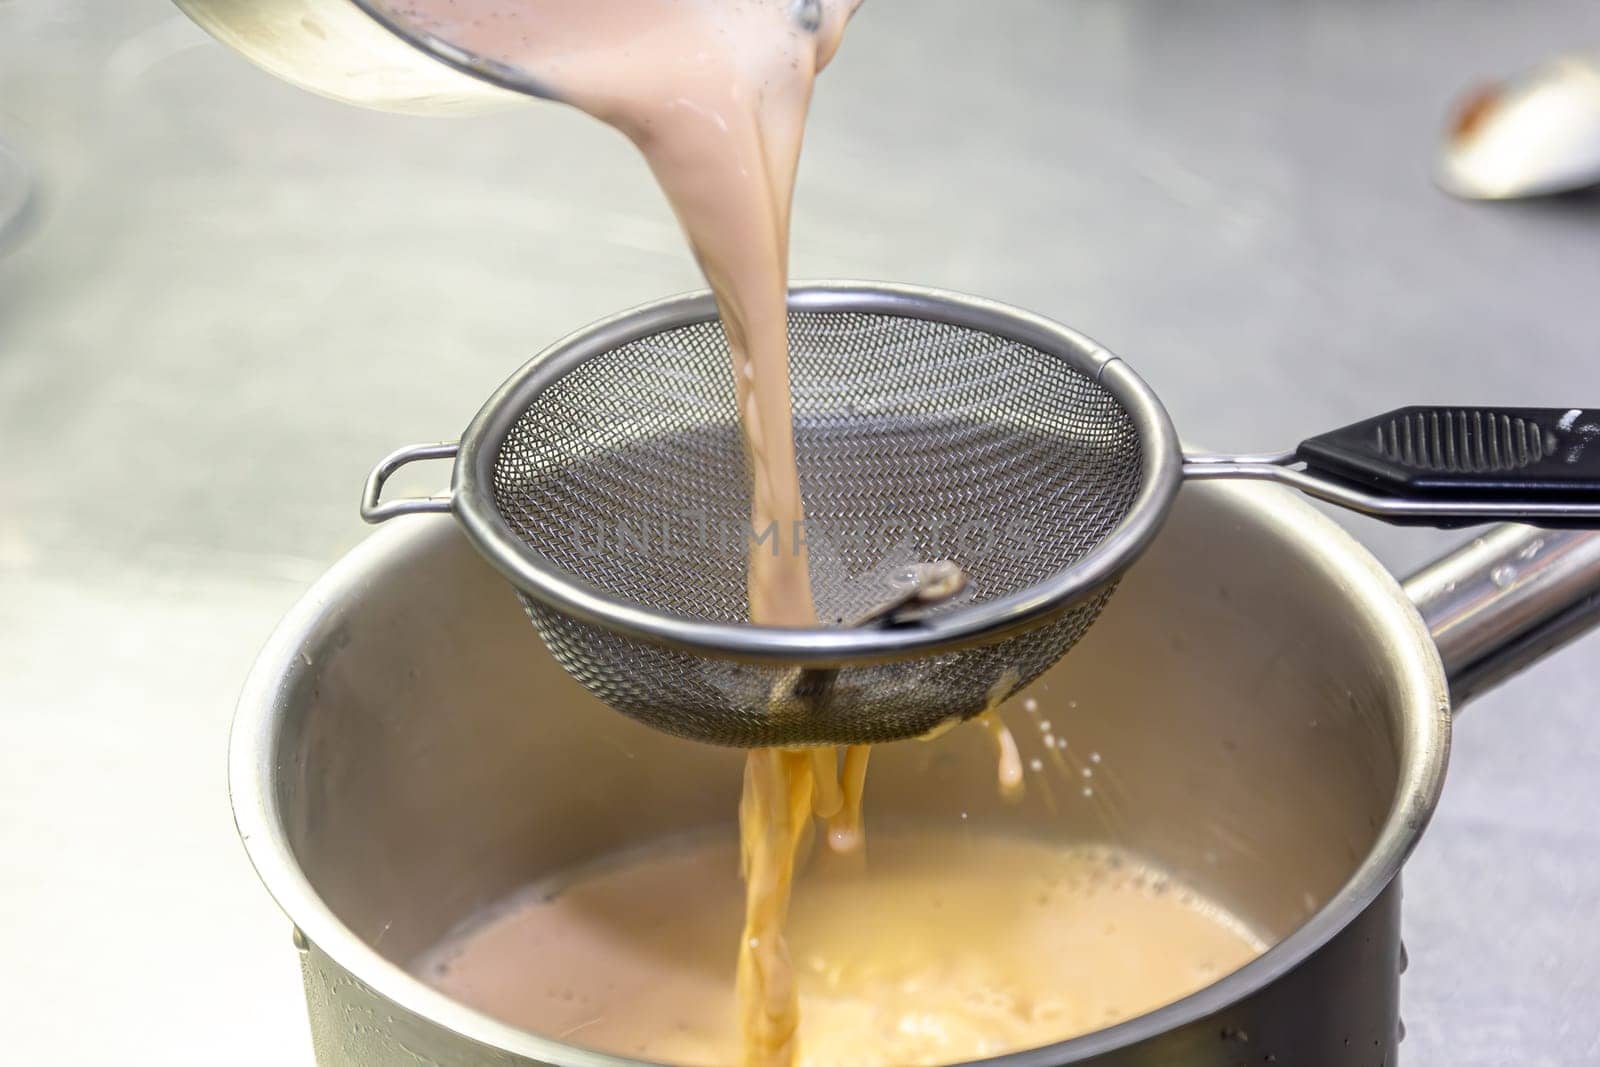 Cooking in the restaurant kitchen. Sifting sauce through a sieve. Chef is filtering sauce. High quality photo by Milanchikov